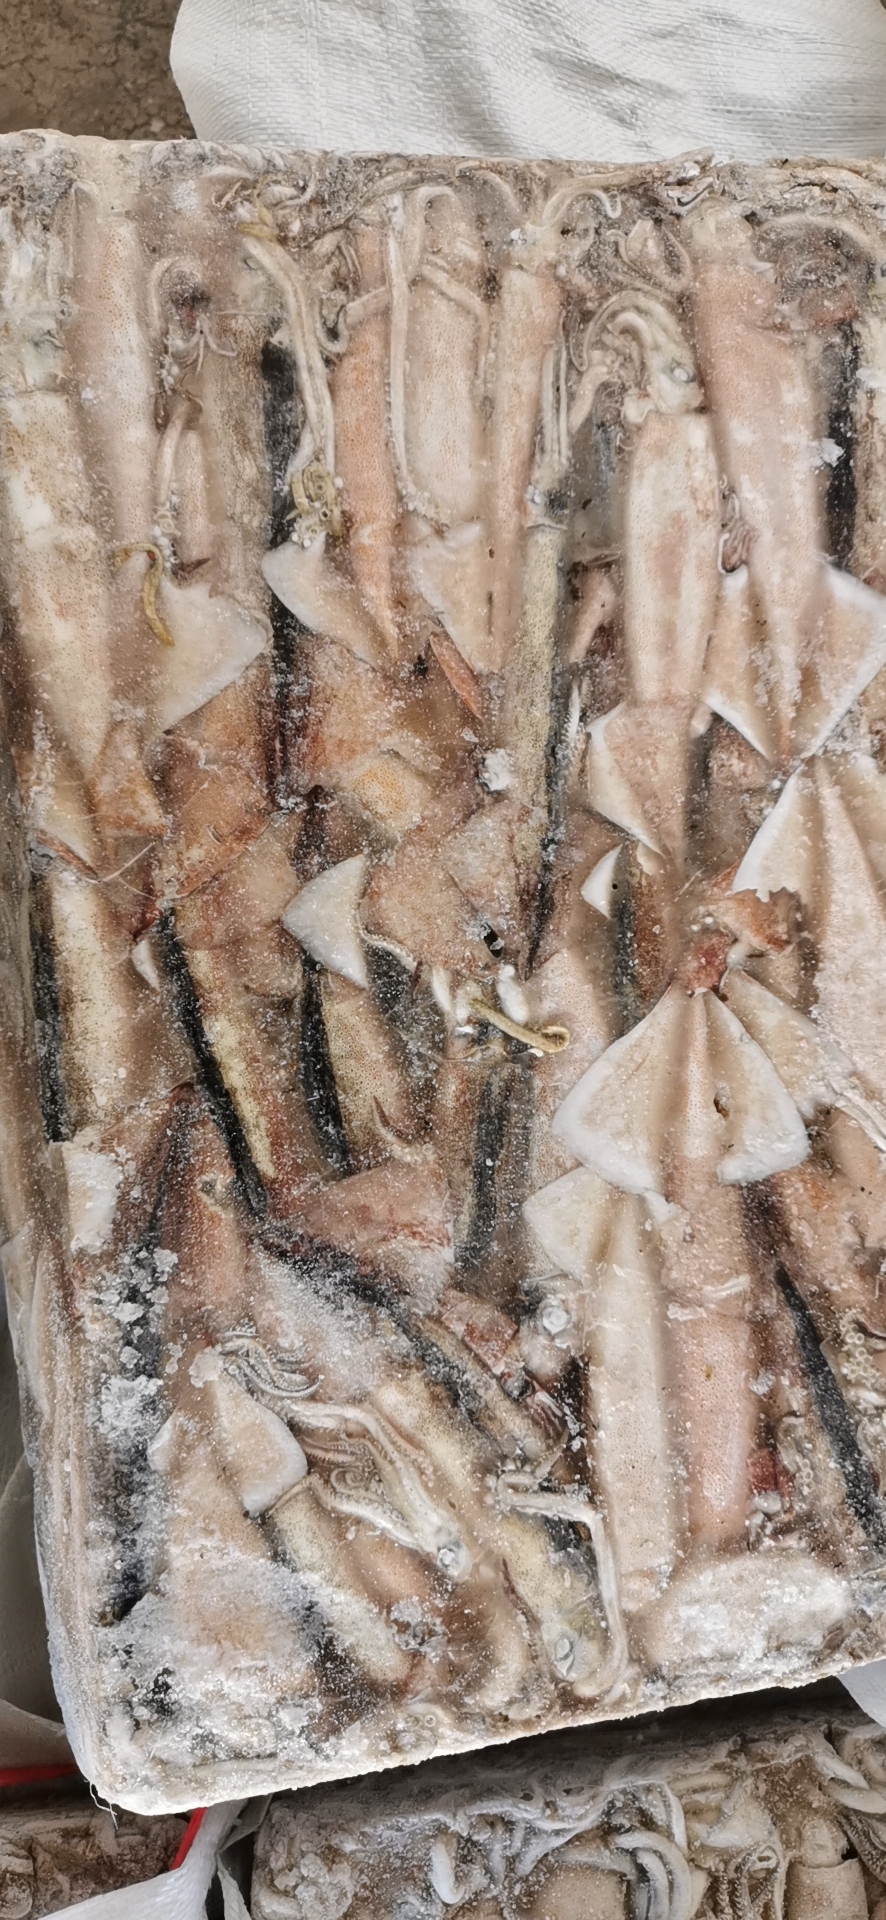 34321 - Frozen Japanese squid from China